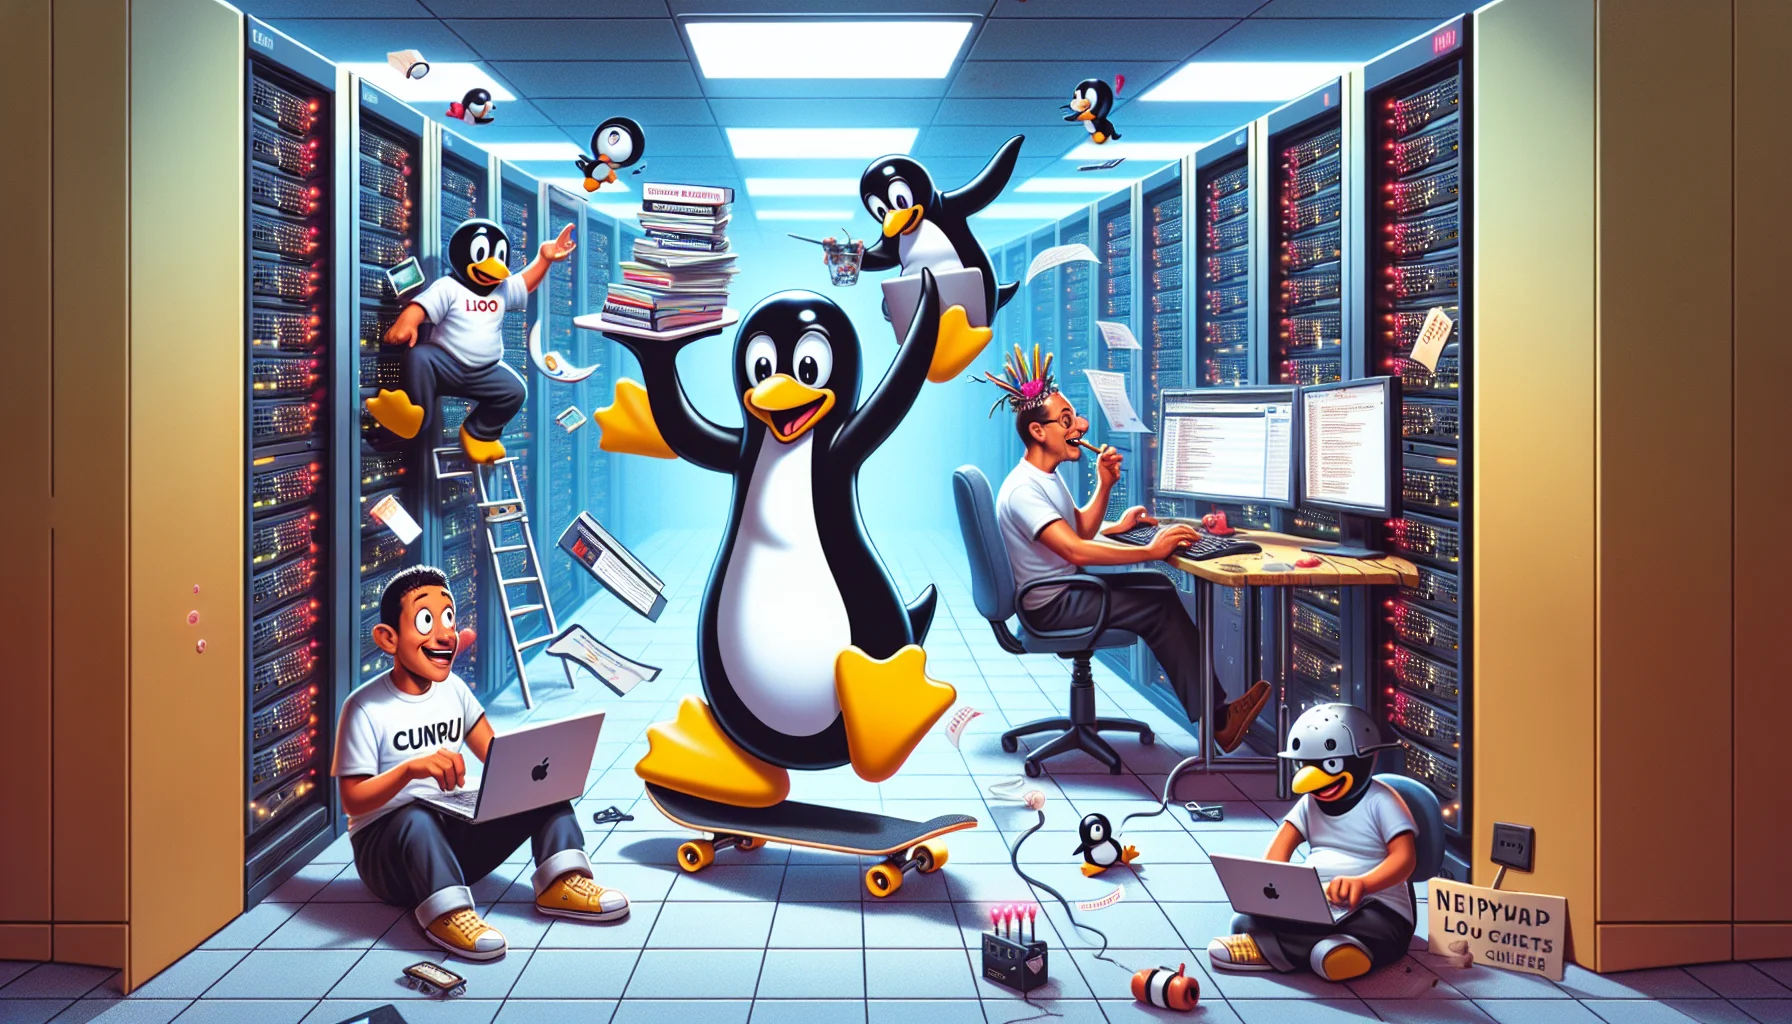 Create a high-quality, humorous depiction of a scenario pertaining to inexpensive Linux web hosting. Imagine a scene where anthropomorphized Linux penguins are working tirelessly to host multitudes of websites at a surprisingly low cost. One penguin could be shown juggling several web domains while skateboarding, another penguin is speedily typing on a keyboard making updates, and yet another penguin, with a headpiece, is talking to customers with a beaming smile. Make sure the environment looks like a high-tech server room filled with blinking lights and cables, emphasizing the tech-centric nature of their operations.